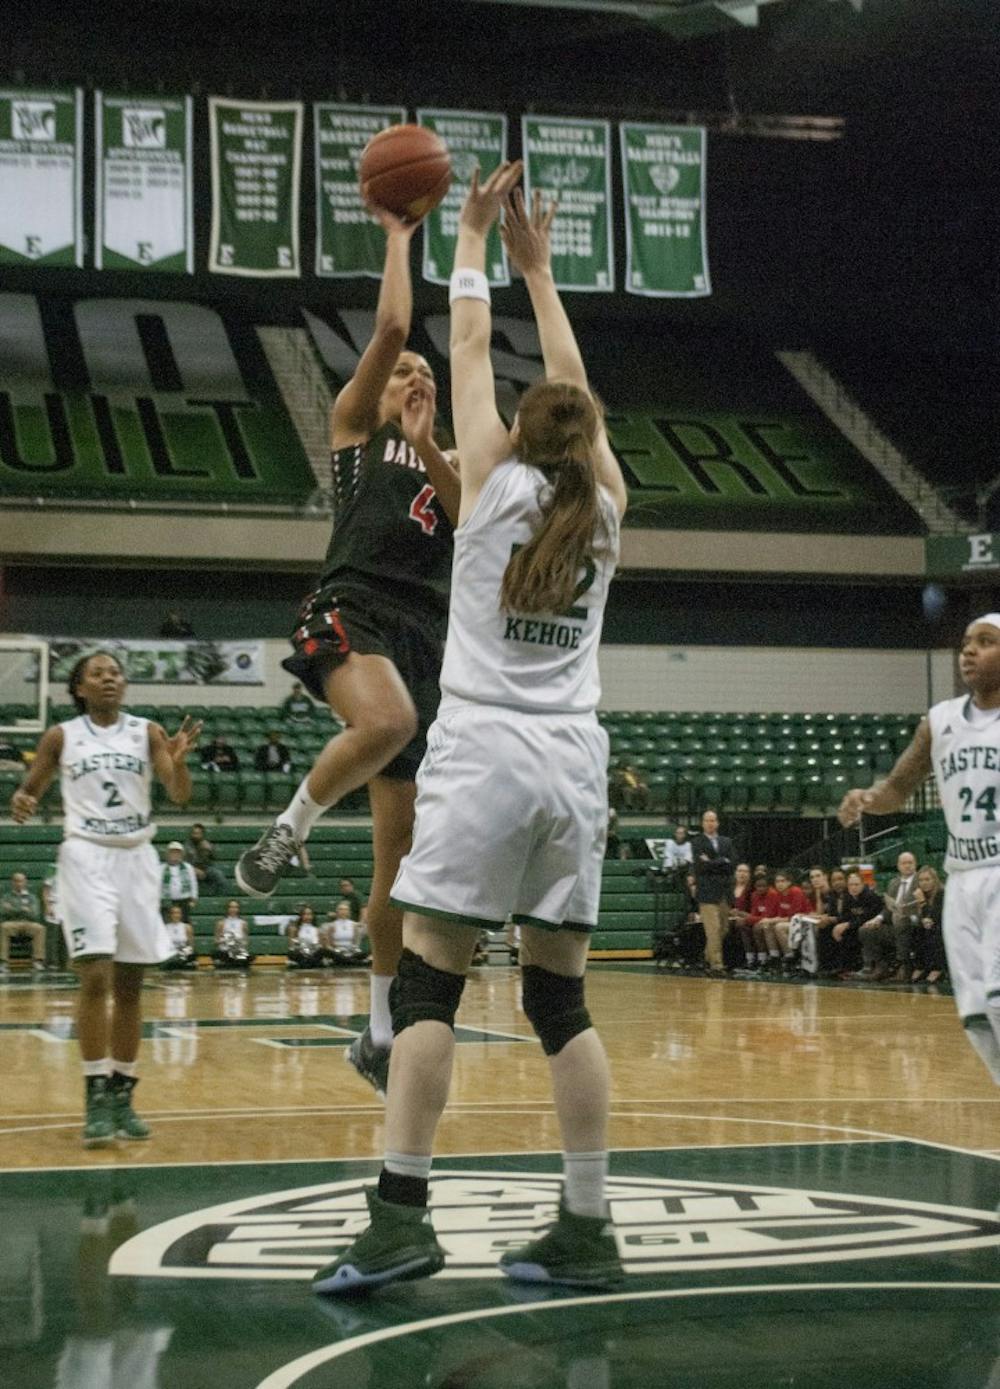 Senior guard Nathalie Fontaine shoots a floater over Eastern Michigan senior center Rachel Kehoe. Fontaine is now just 22 points shy of Tamara Bowie’s career scoring record of 2,901 points. DN PHOTO COLIN GRYLLS